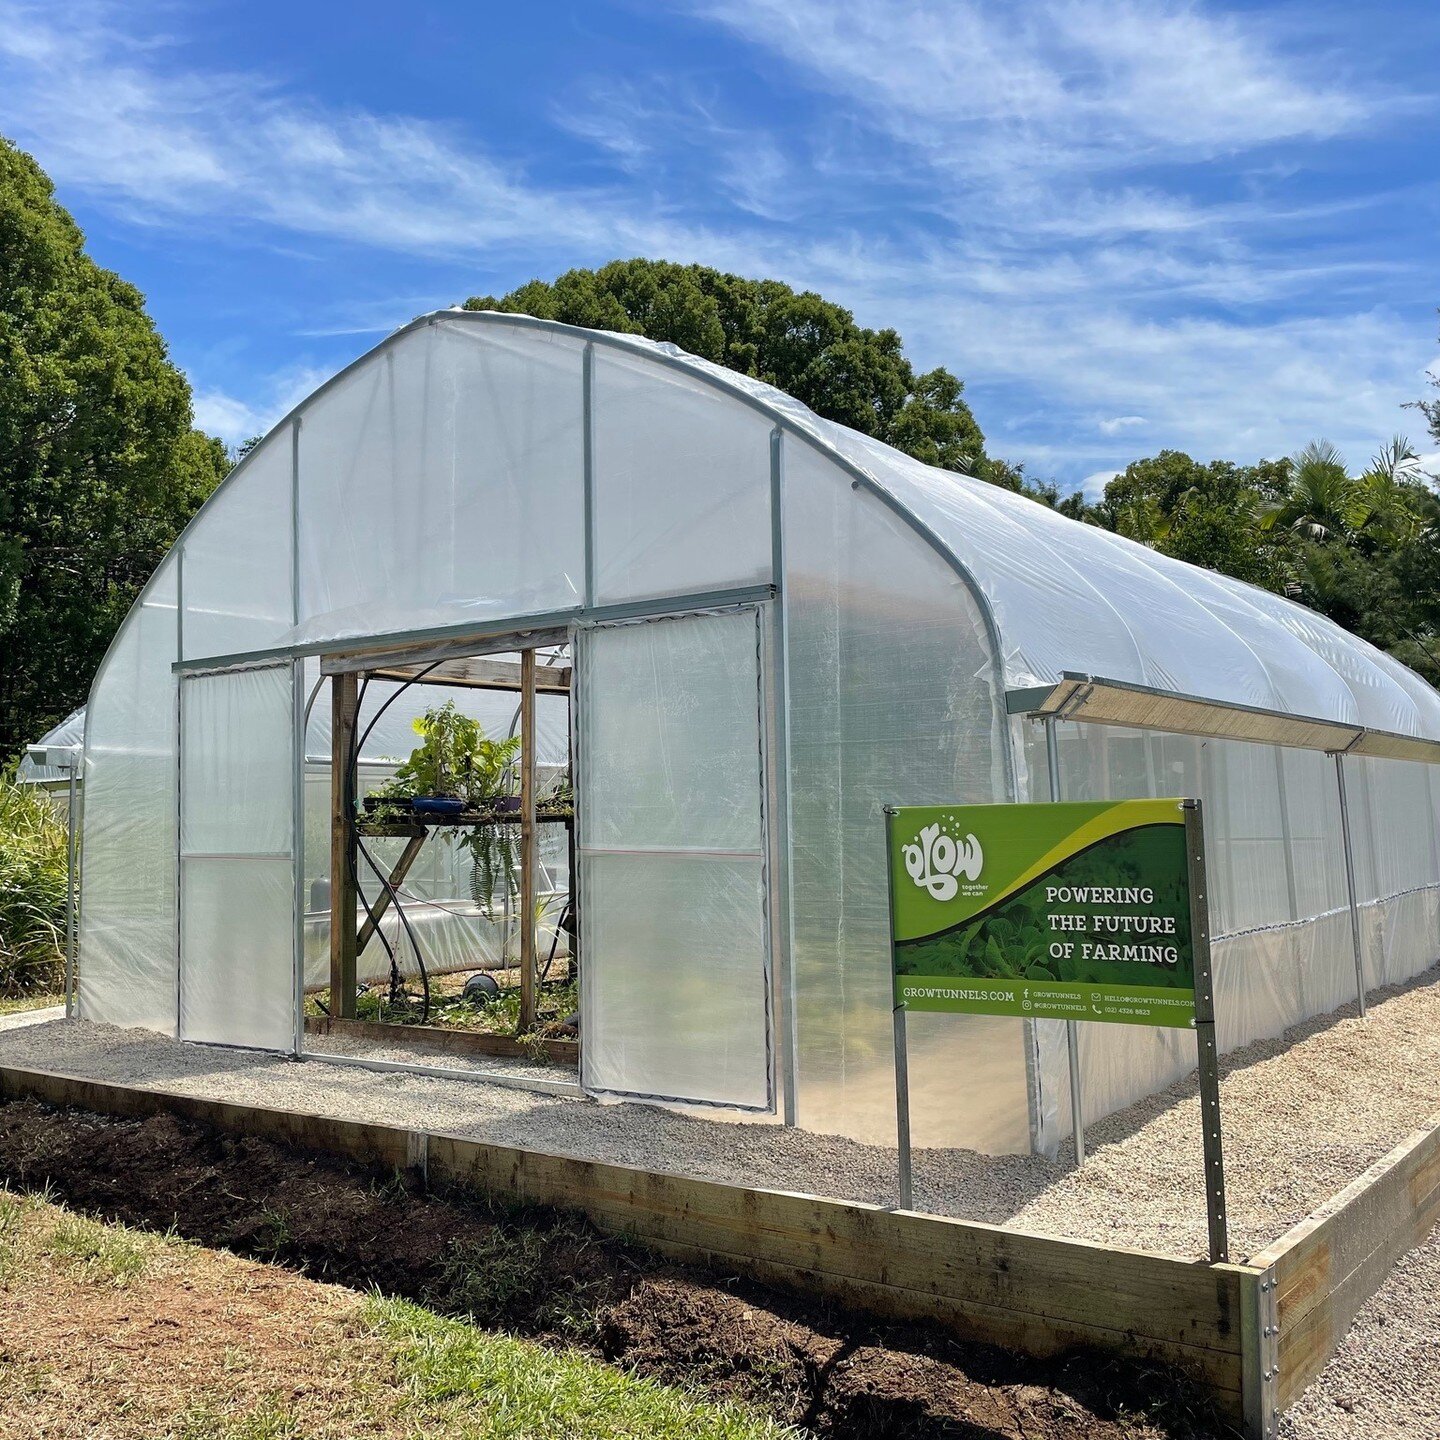 How are your crops growing? 

We recently installed a pair of 6M x 9M Rural GROWtunnels for vegetable production on the edge of busy Byron Bay. 

These tunnels will be used to feed the local community with local residents able to come and &quot;pick 